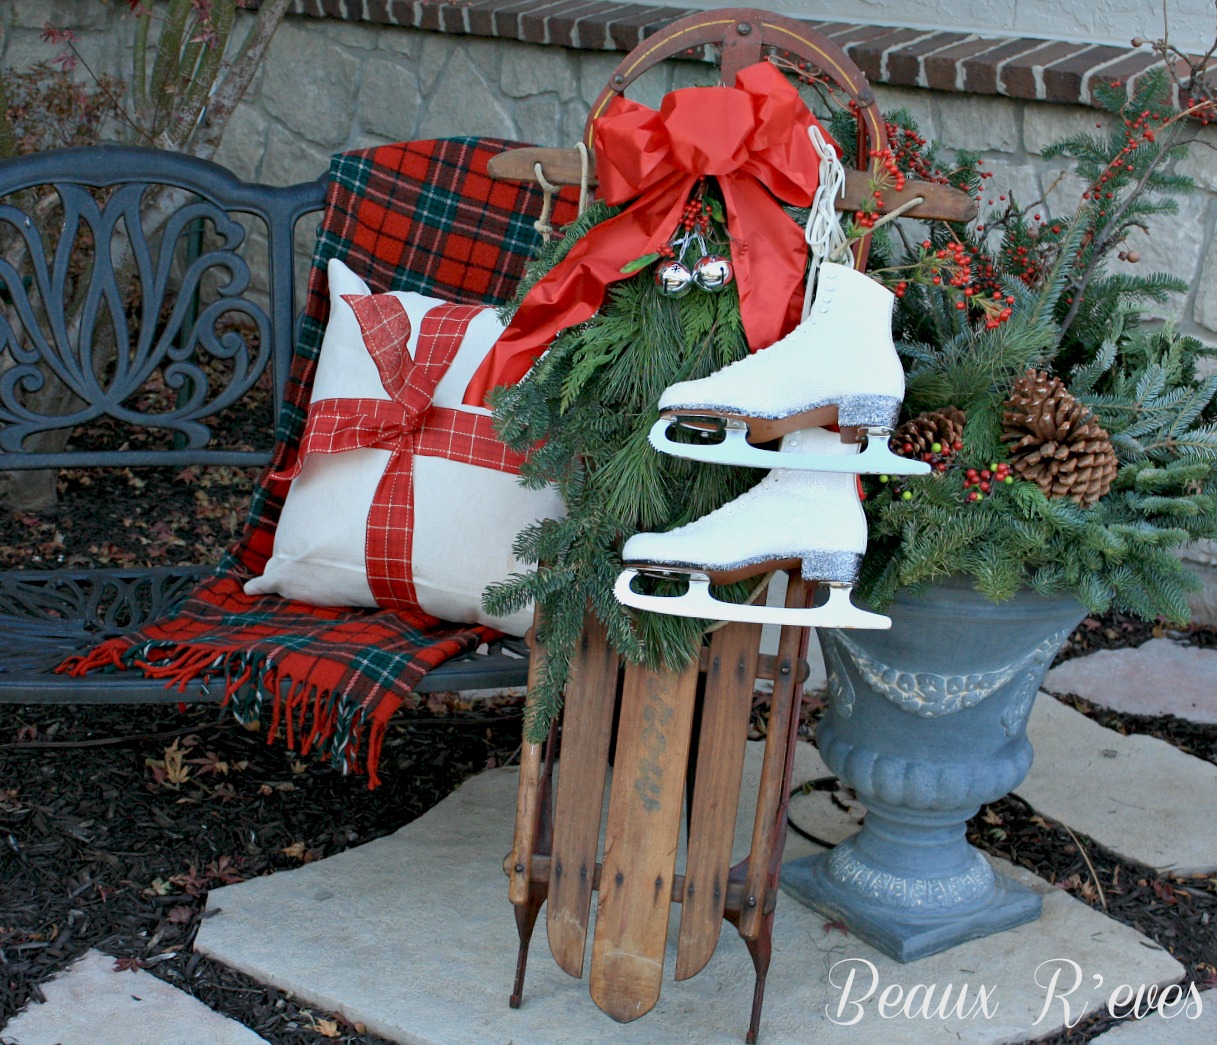 Beaux R'eves: Christmas Curb Appeal